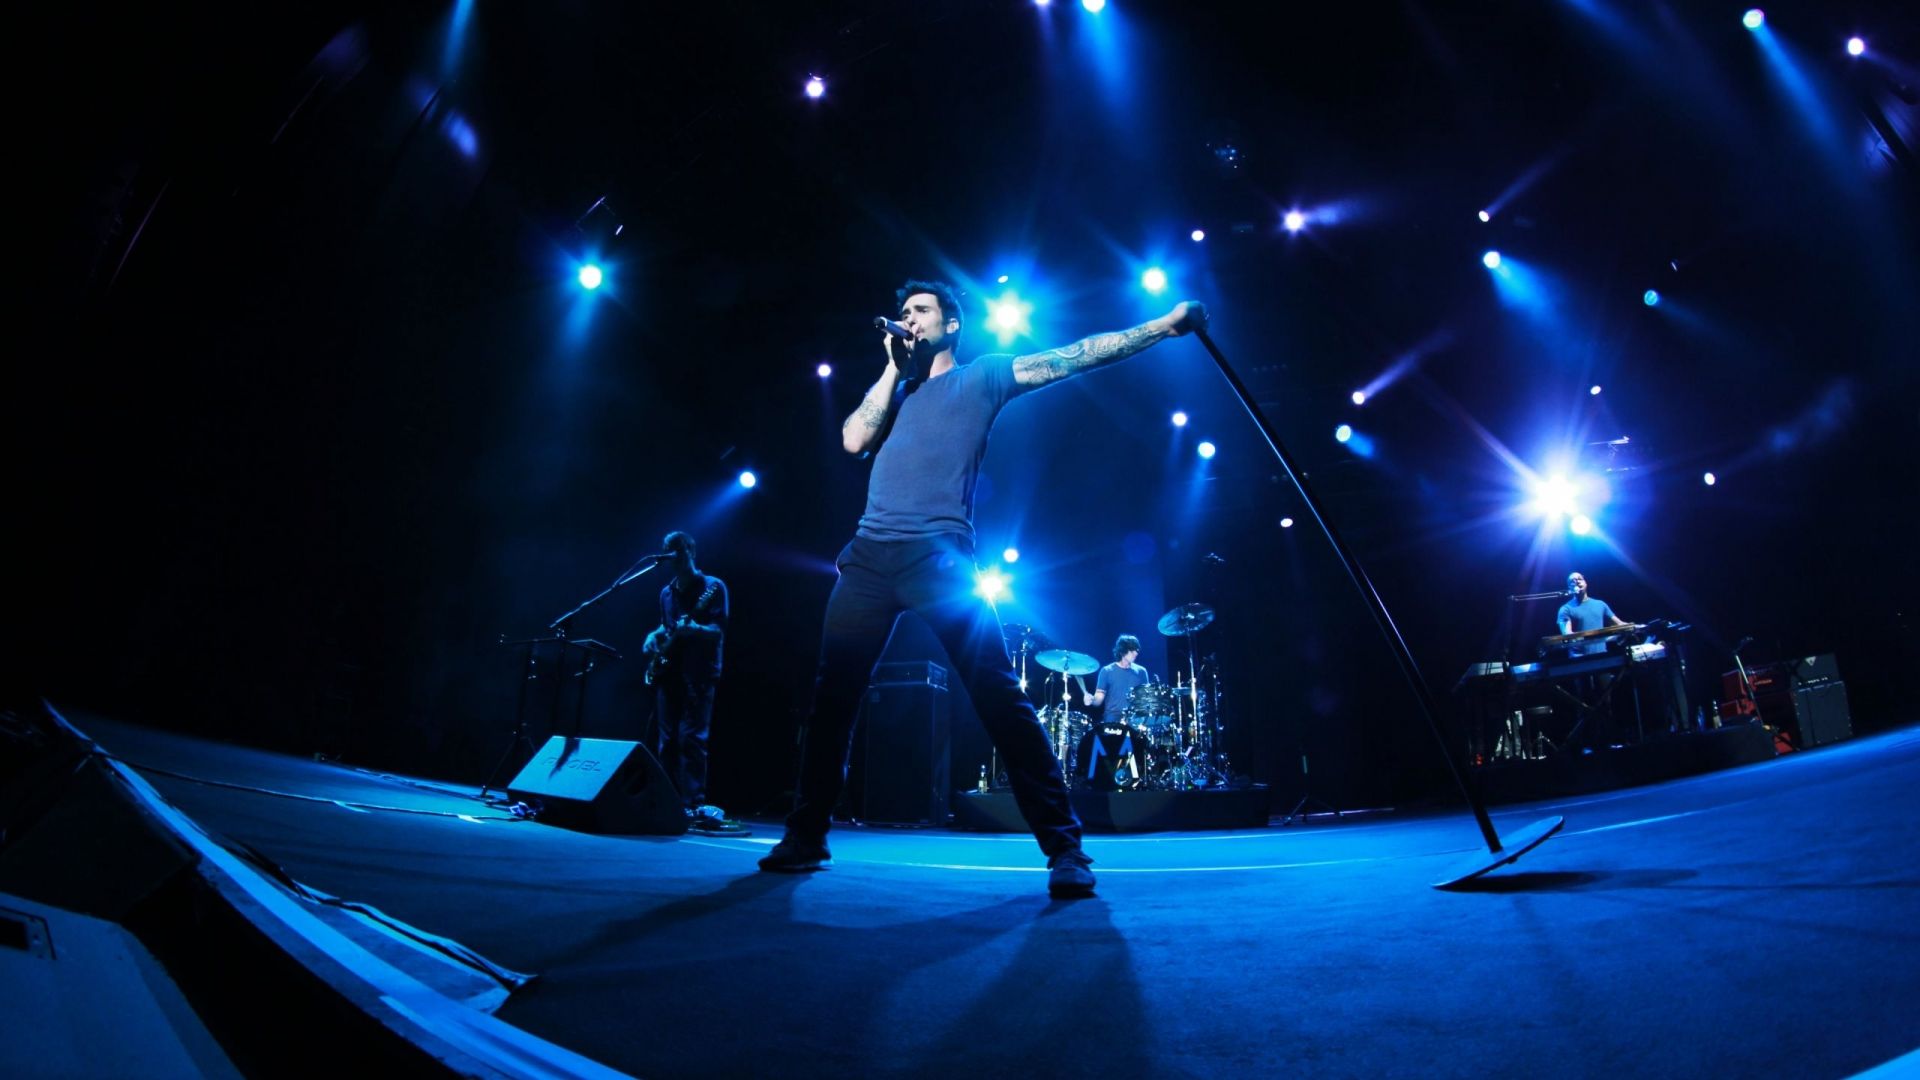 Free download Maroon 5 [2560x1600] for your Desktop, Mobile